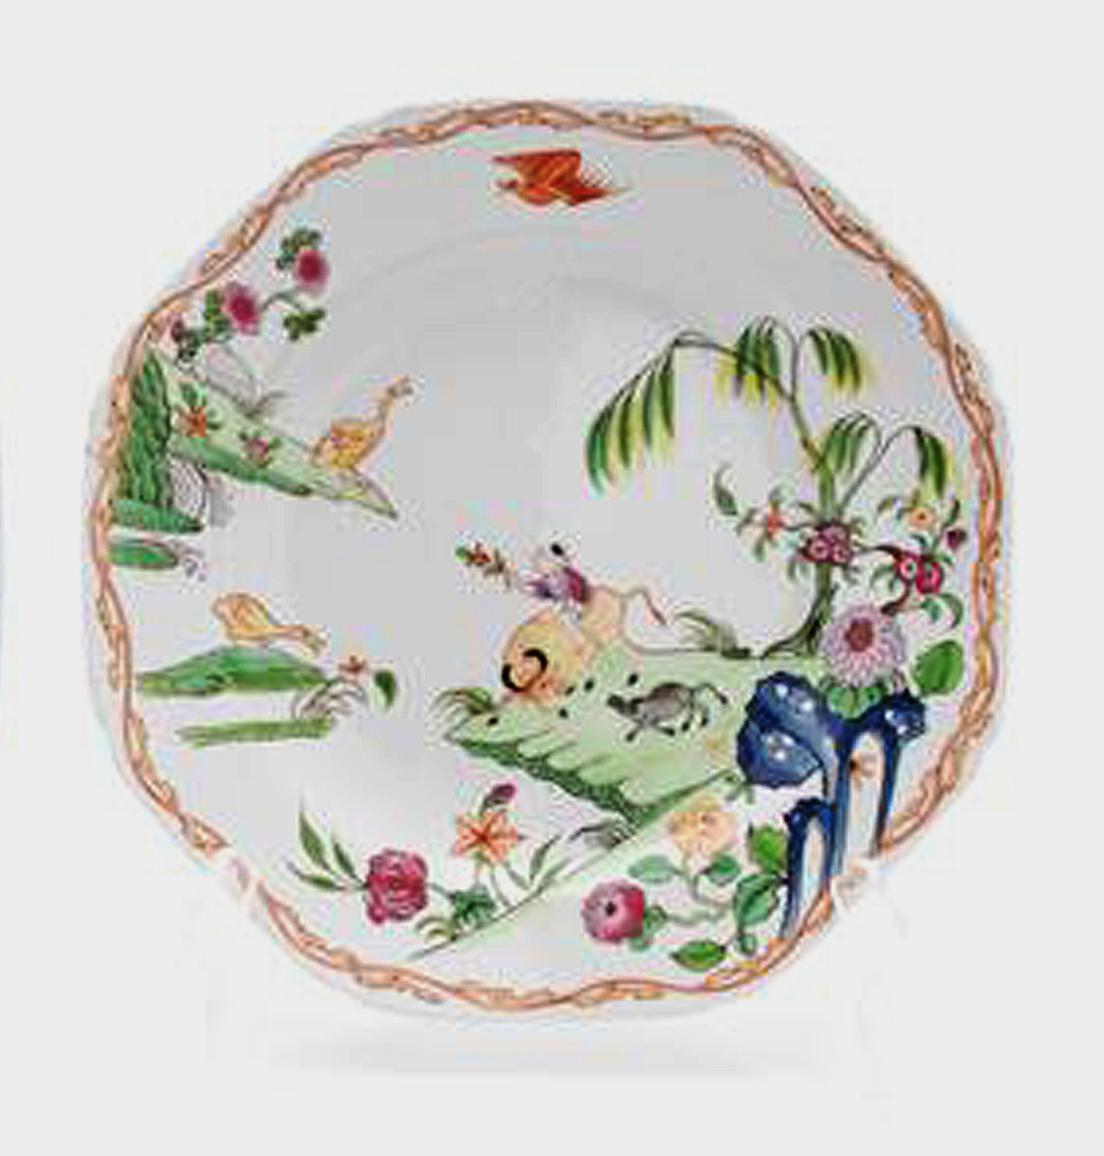 English porcelain pair of Chinoiserie plates with the boy and buffalo pattern,
Probably Miles Mason, circa 1805

The beautiful English porcelain Bone China plates depict a pattern found on Chinese Export porcelain and were most likely made as